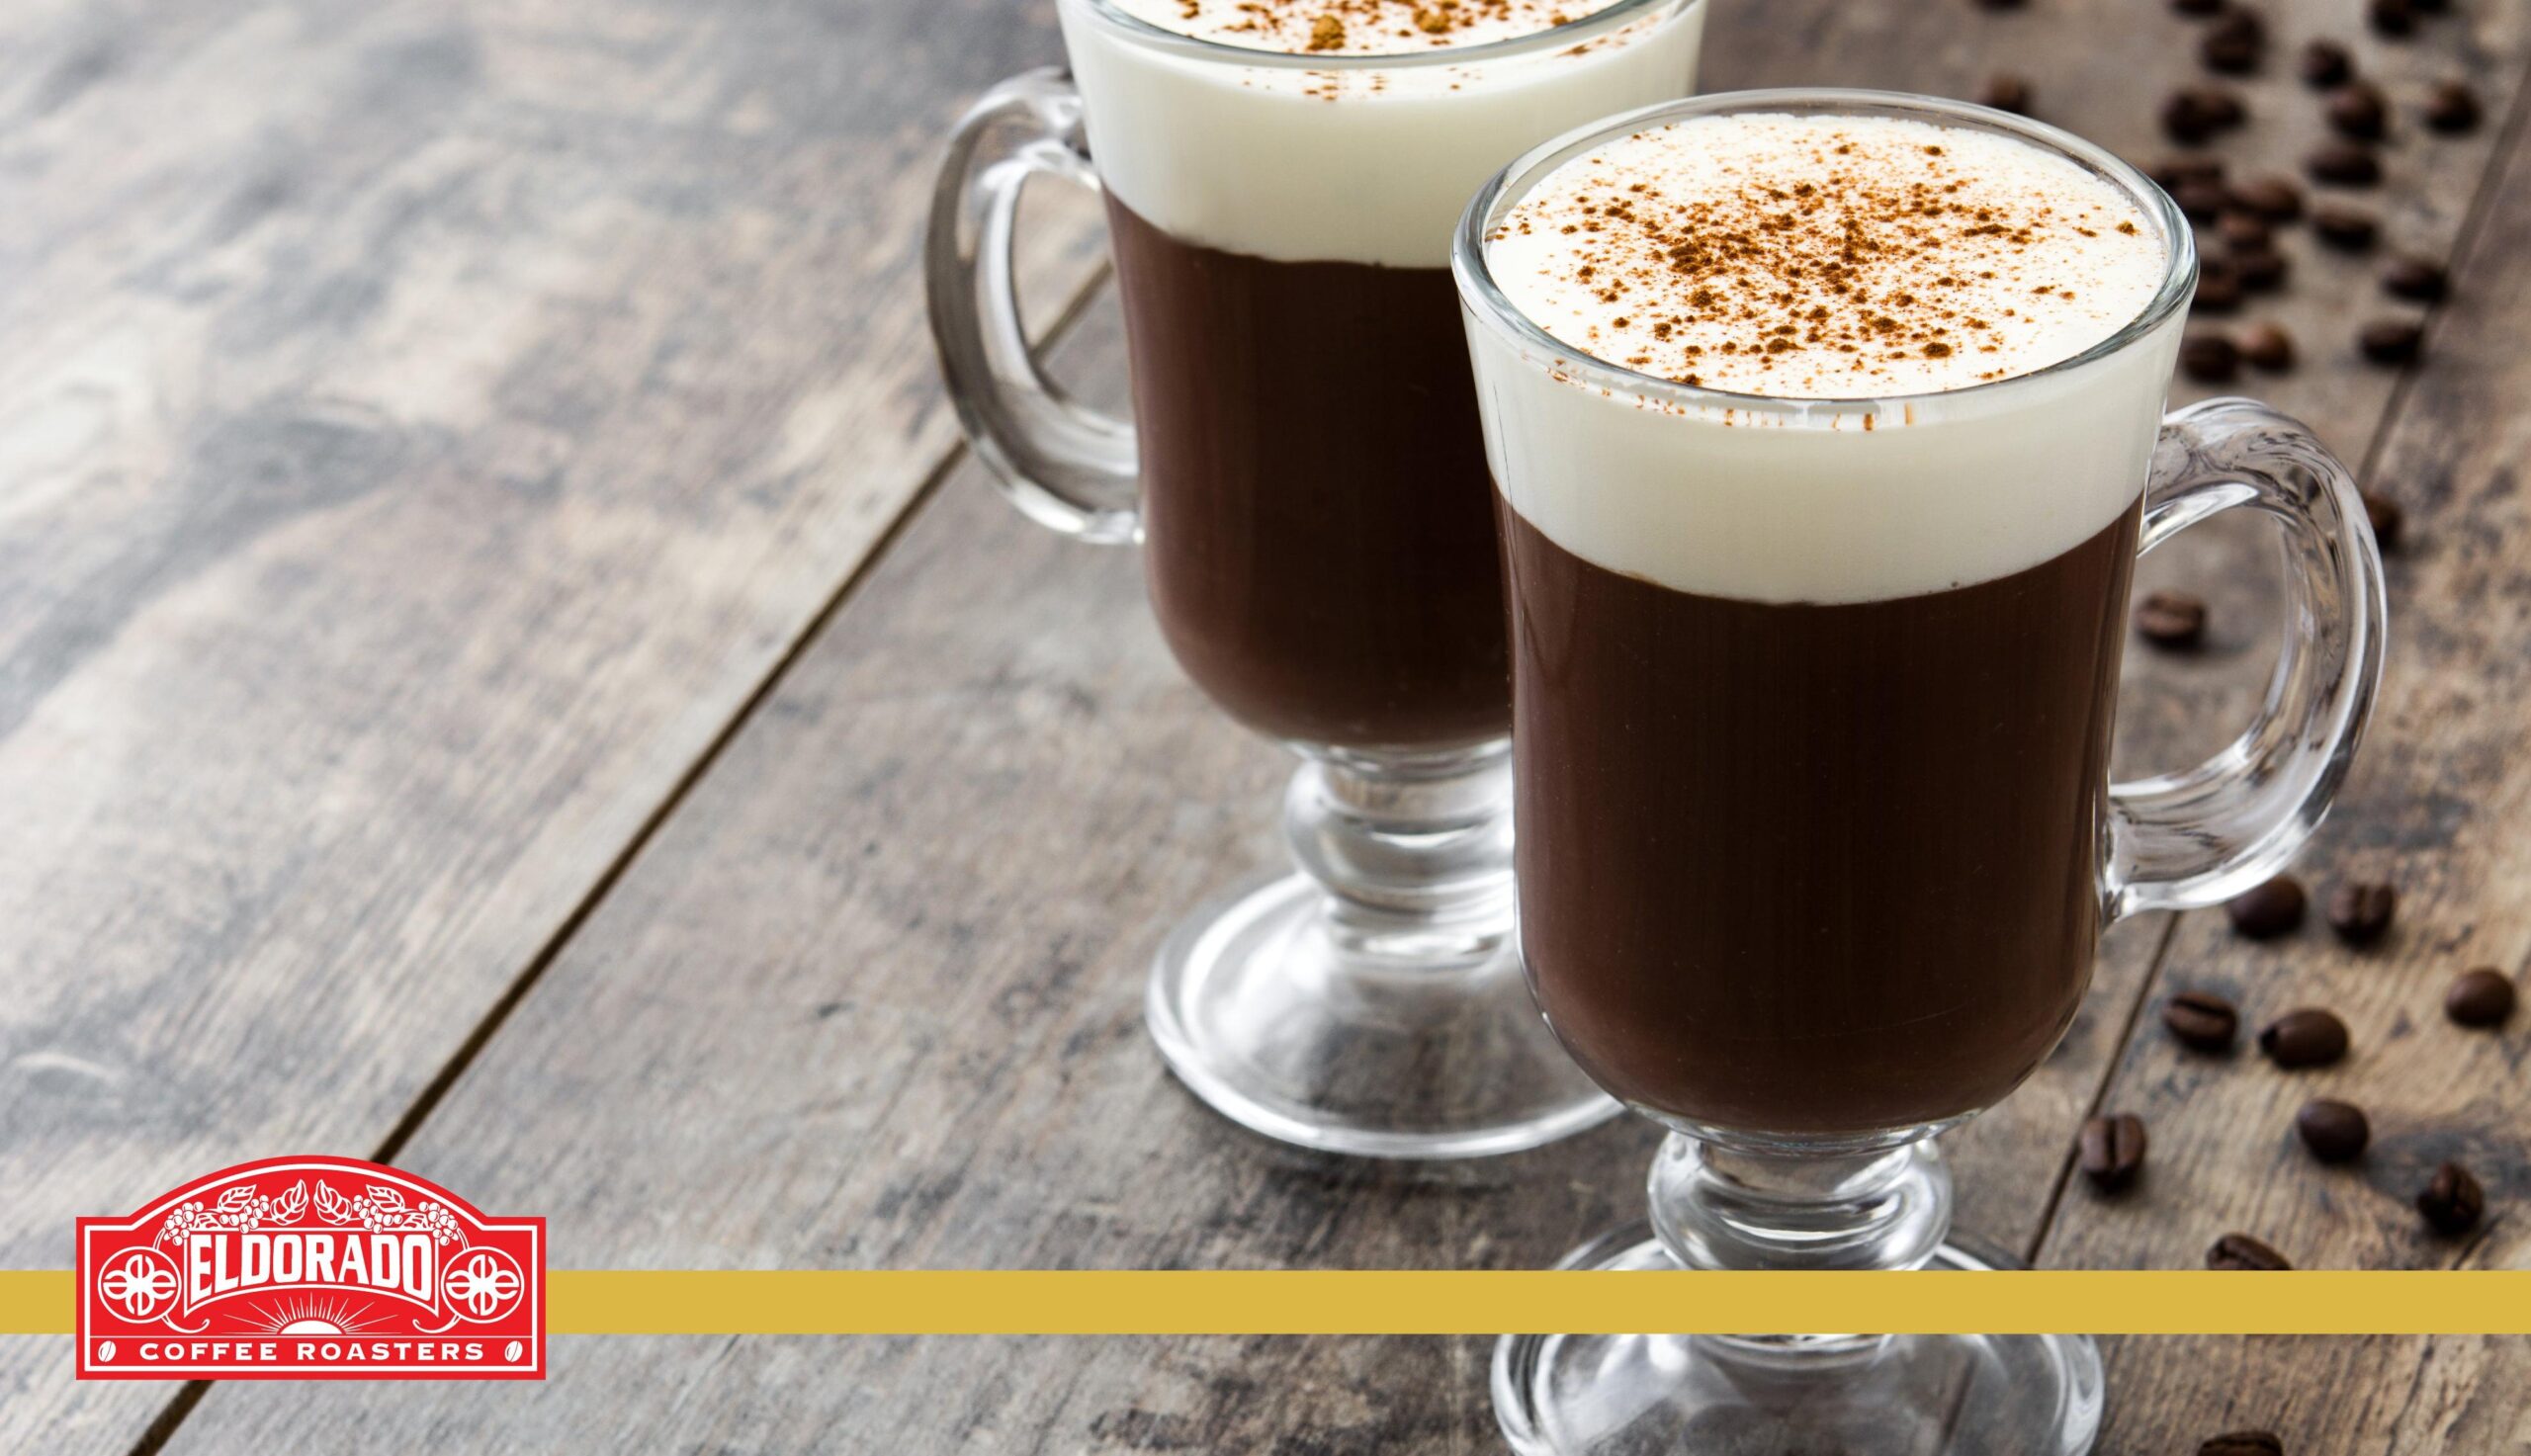  Stir up this delicious cocktail-style coffee for a relaxing evening at home.